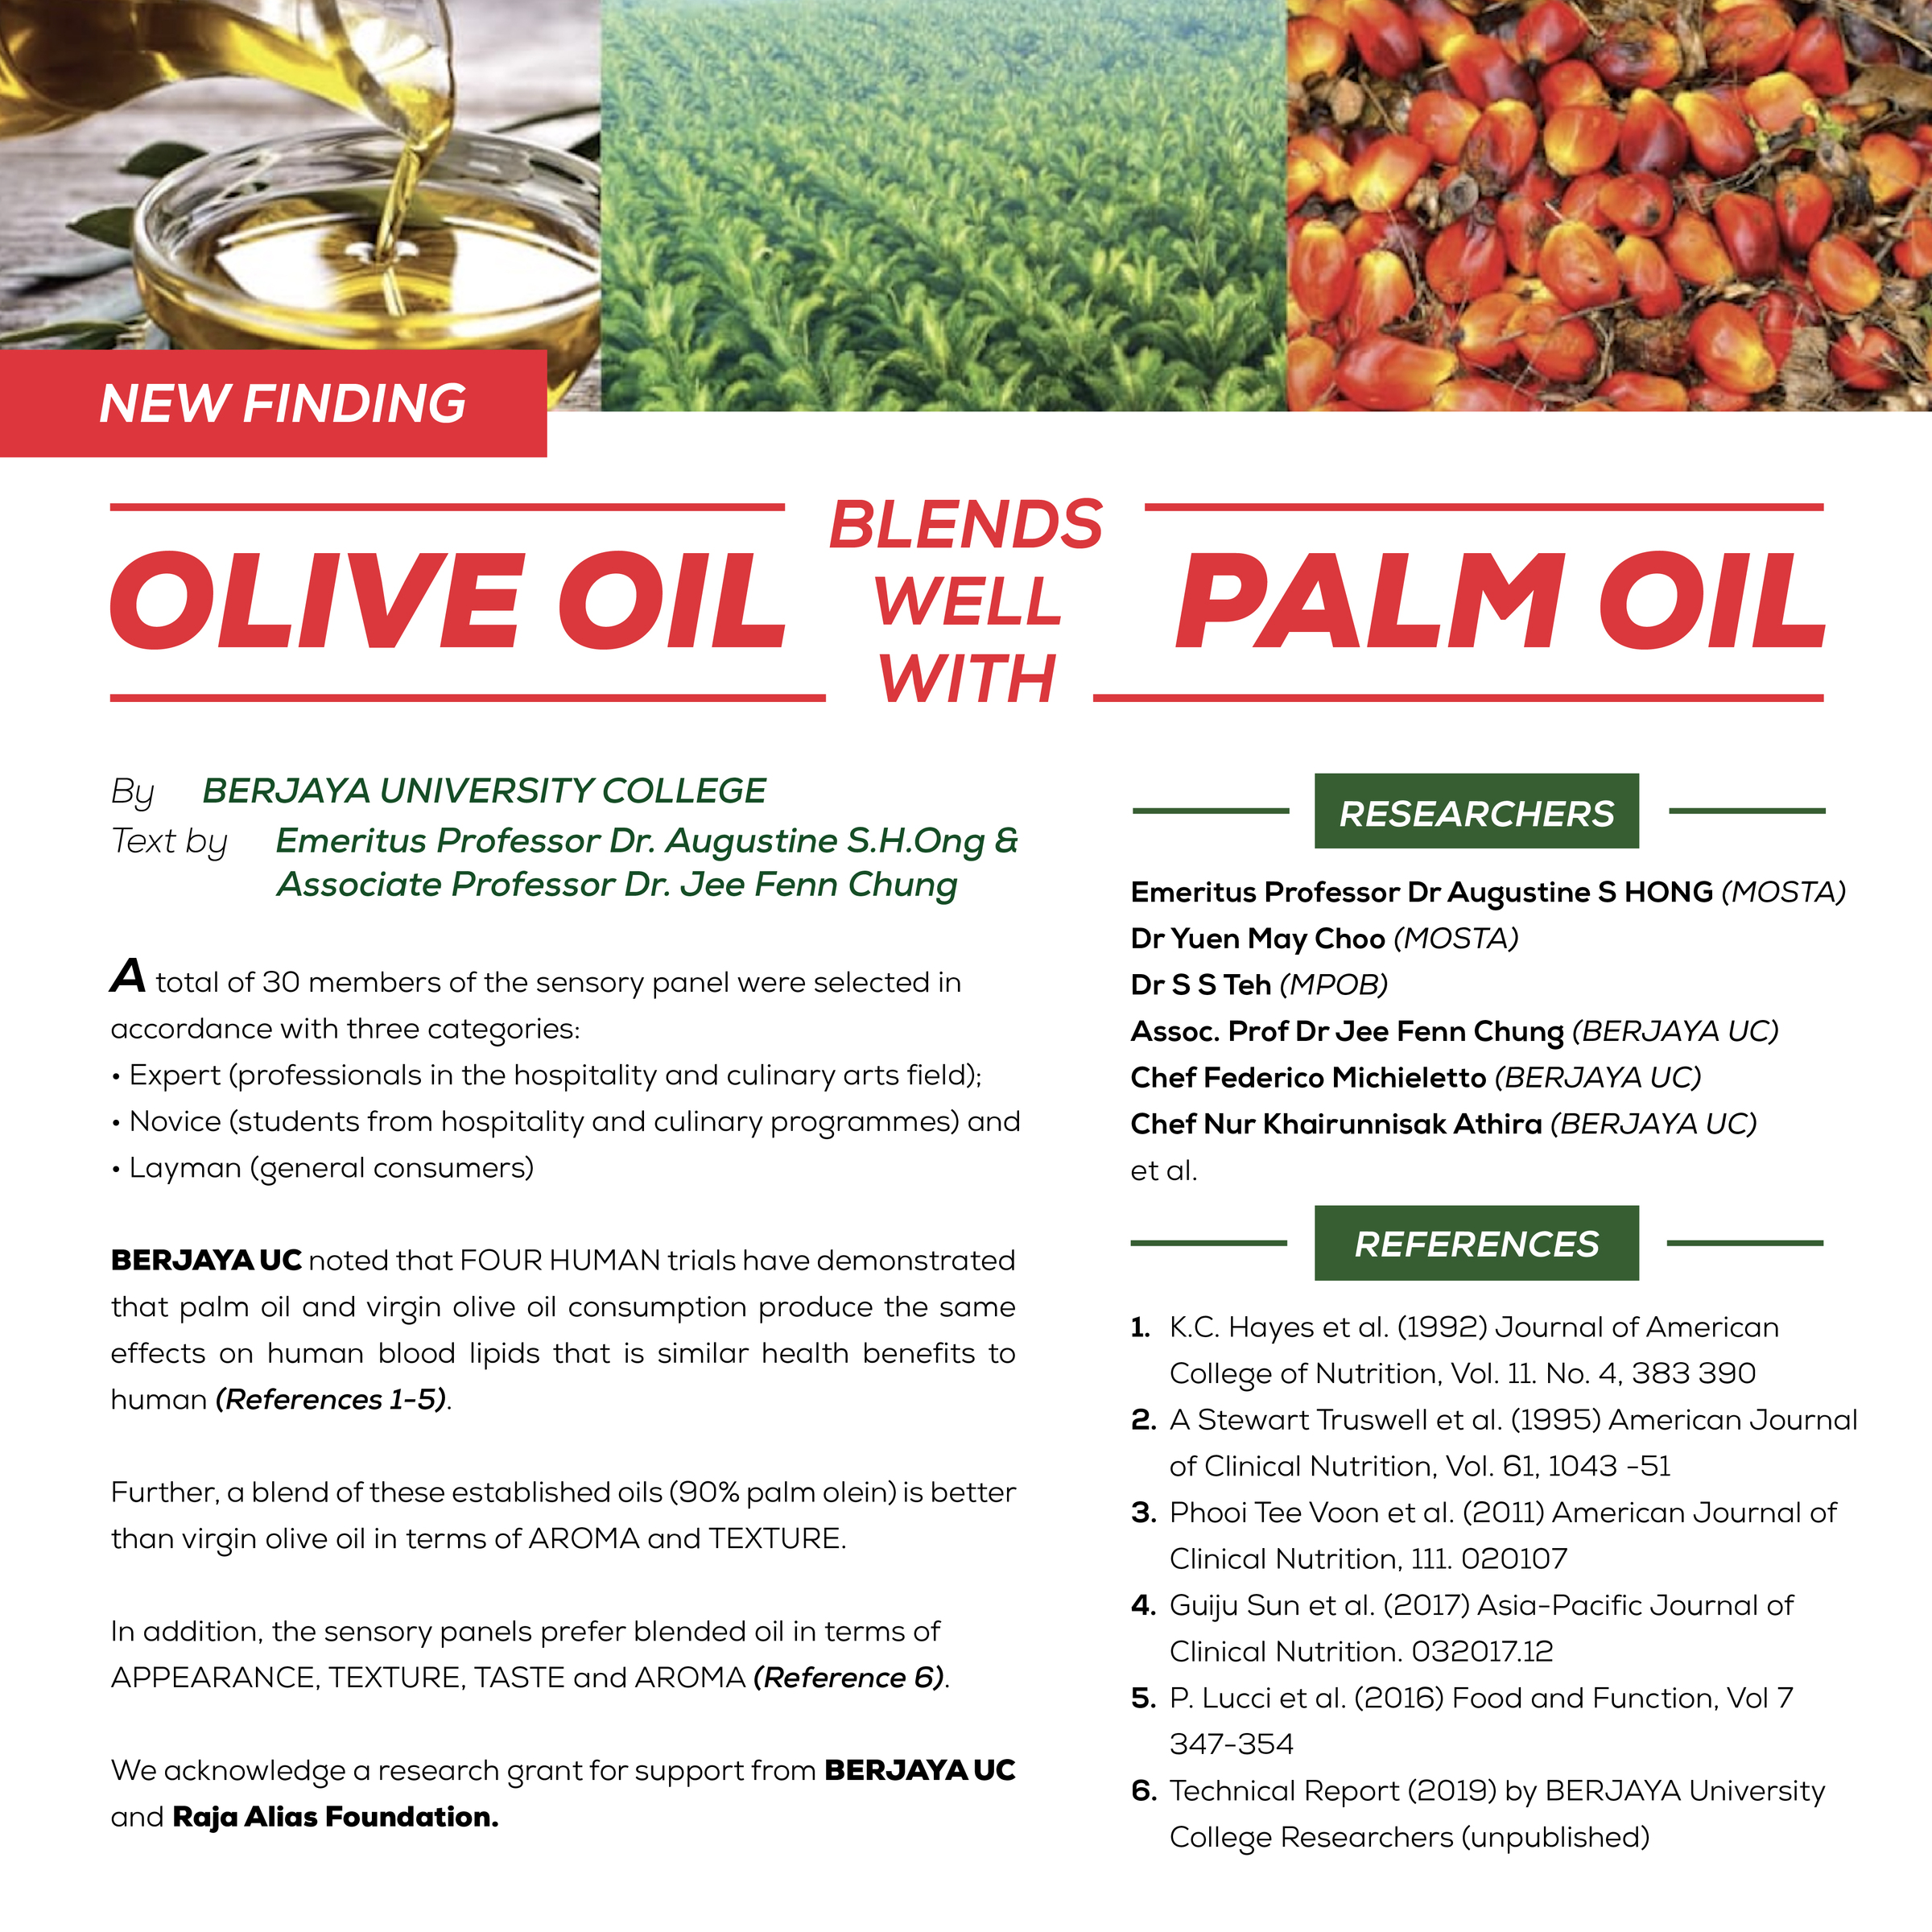 220531_Nonosugar_Olive Oil Blends Well with Palm Oil-01.jpg